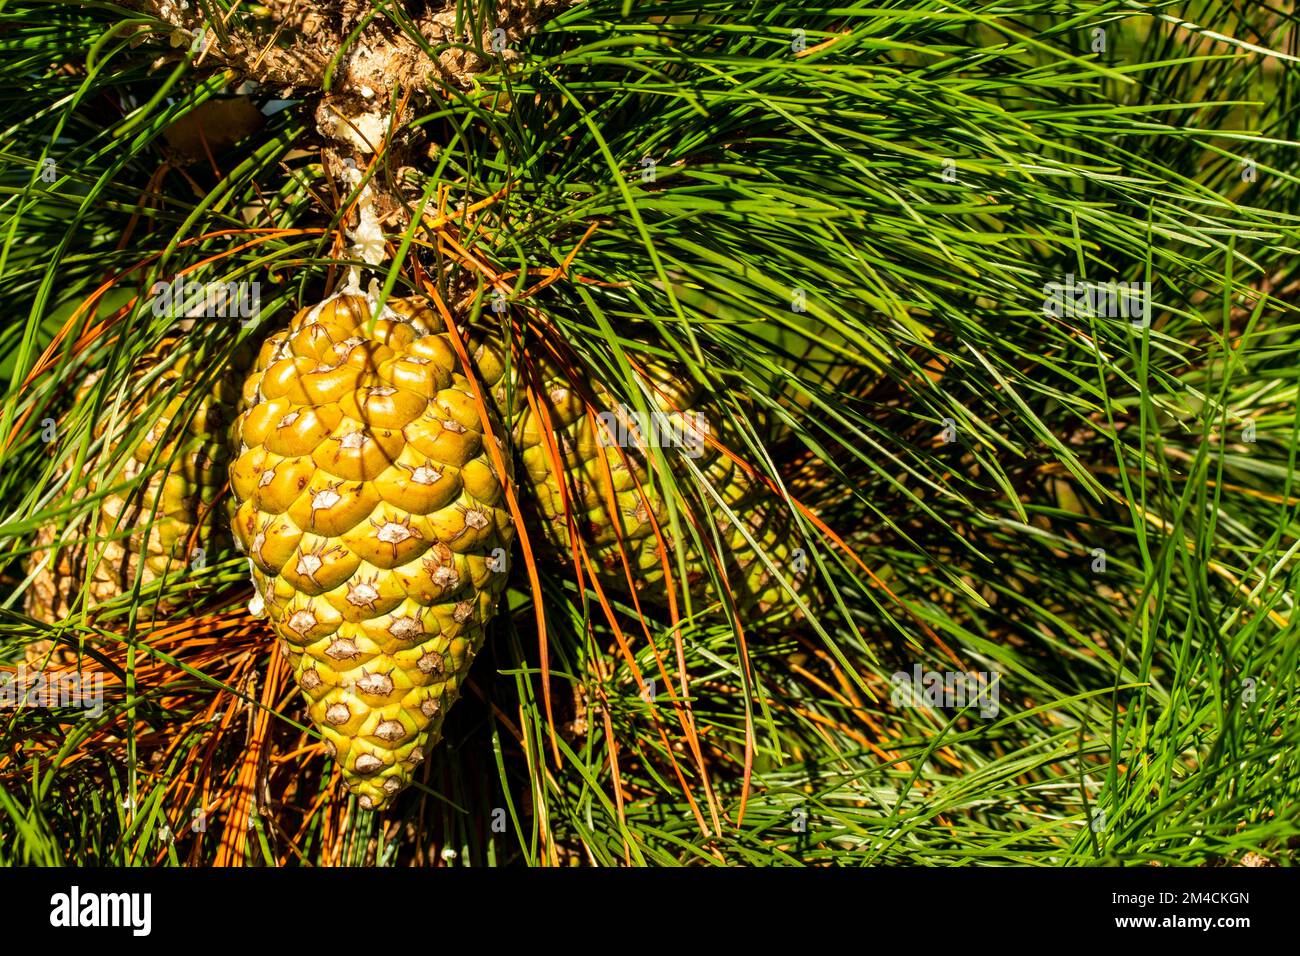 Found close up natural plant still life of conifer cone and foliage. Natural patterns in environmental chaos Stock Photo